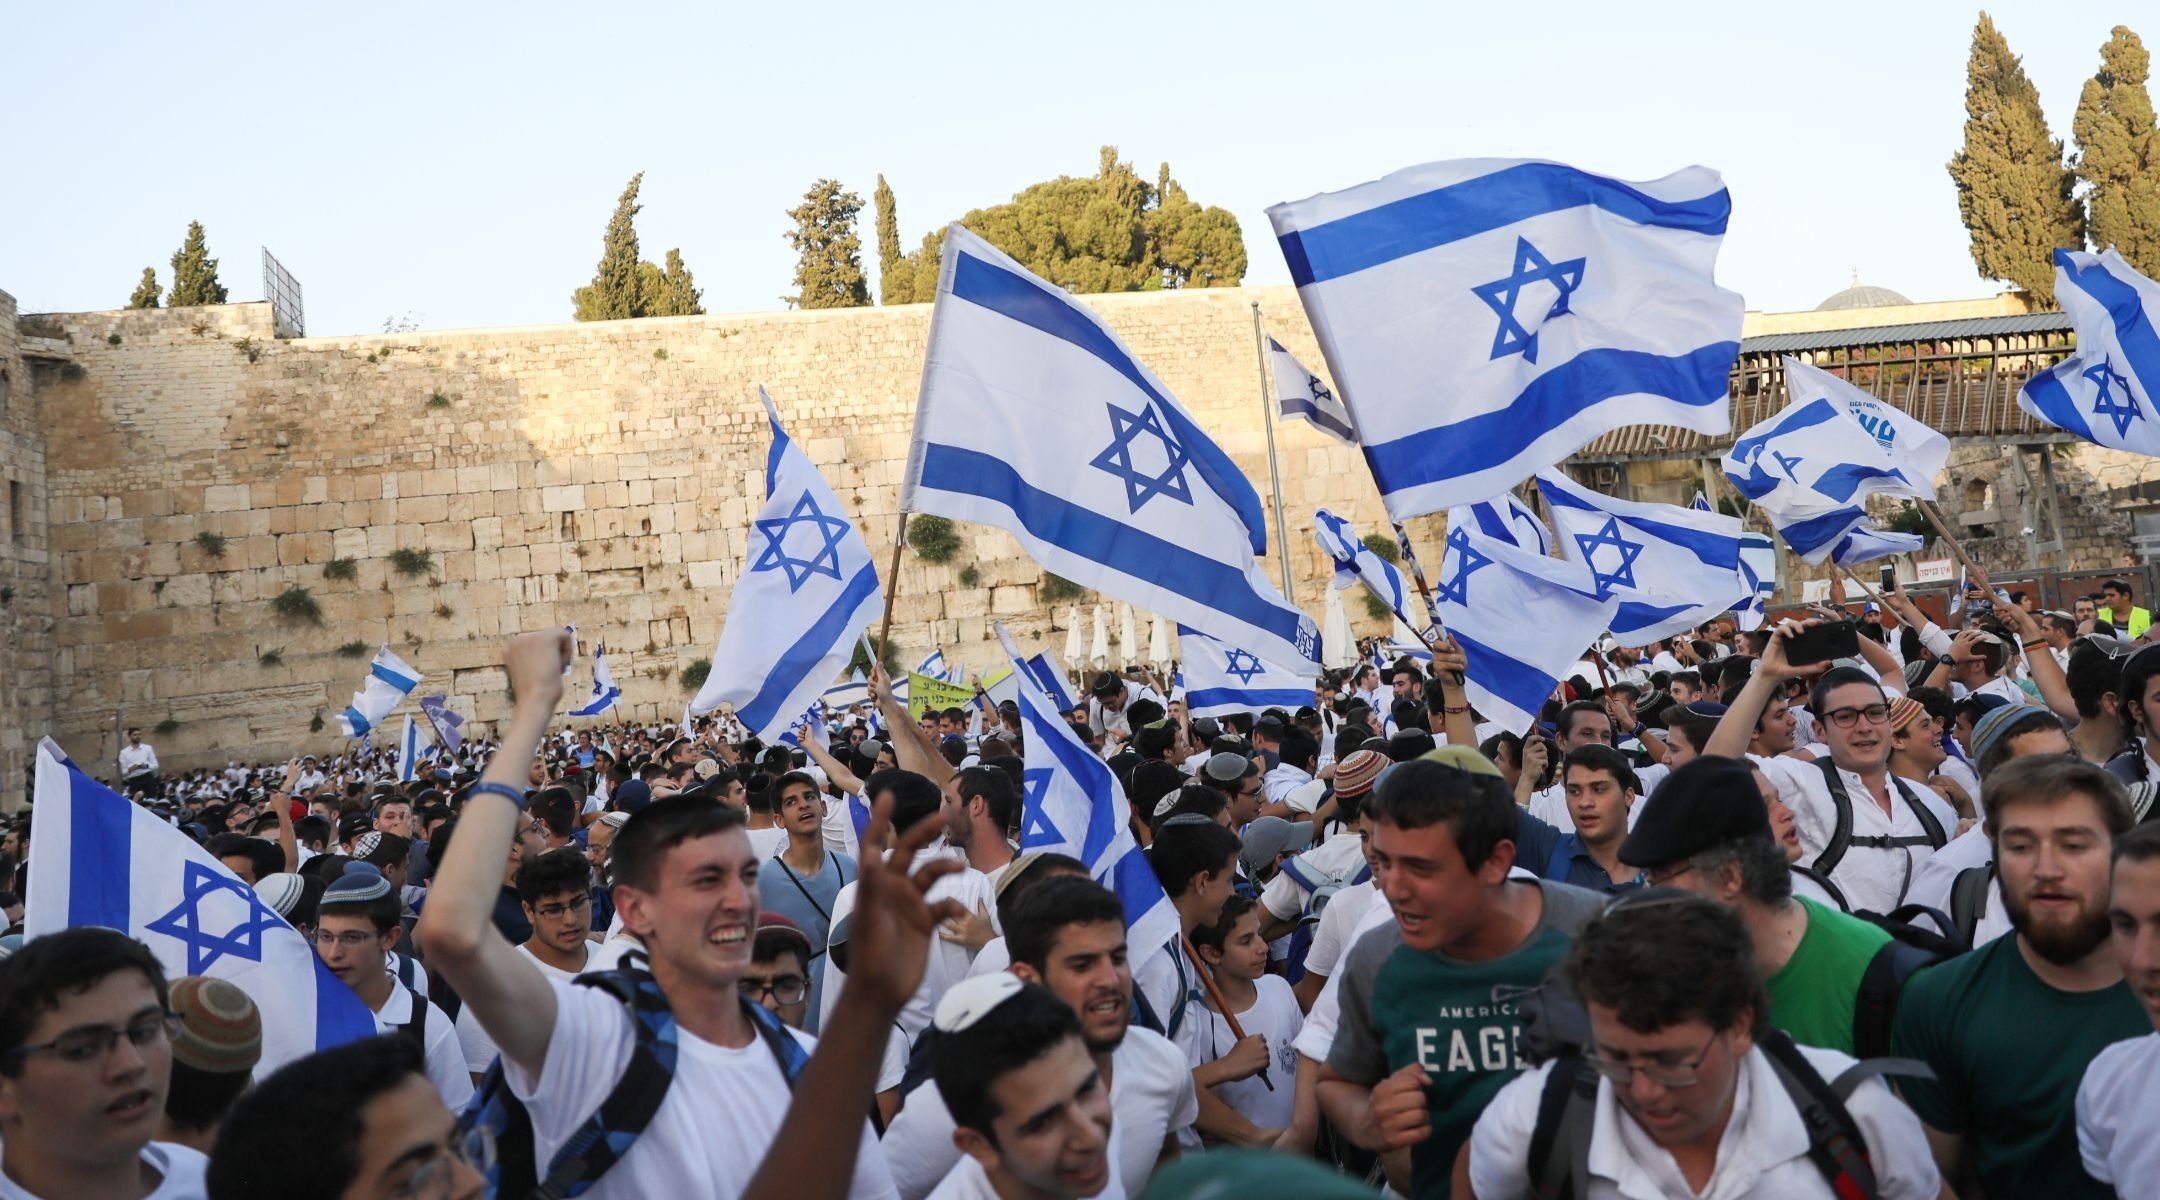 Tens of thousands of Israeli youth join Flag March through Jerusalem - Jewish Telegraphic Agency